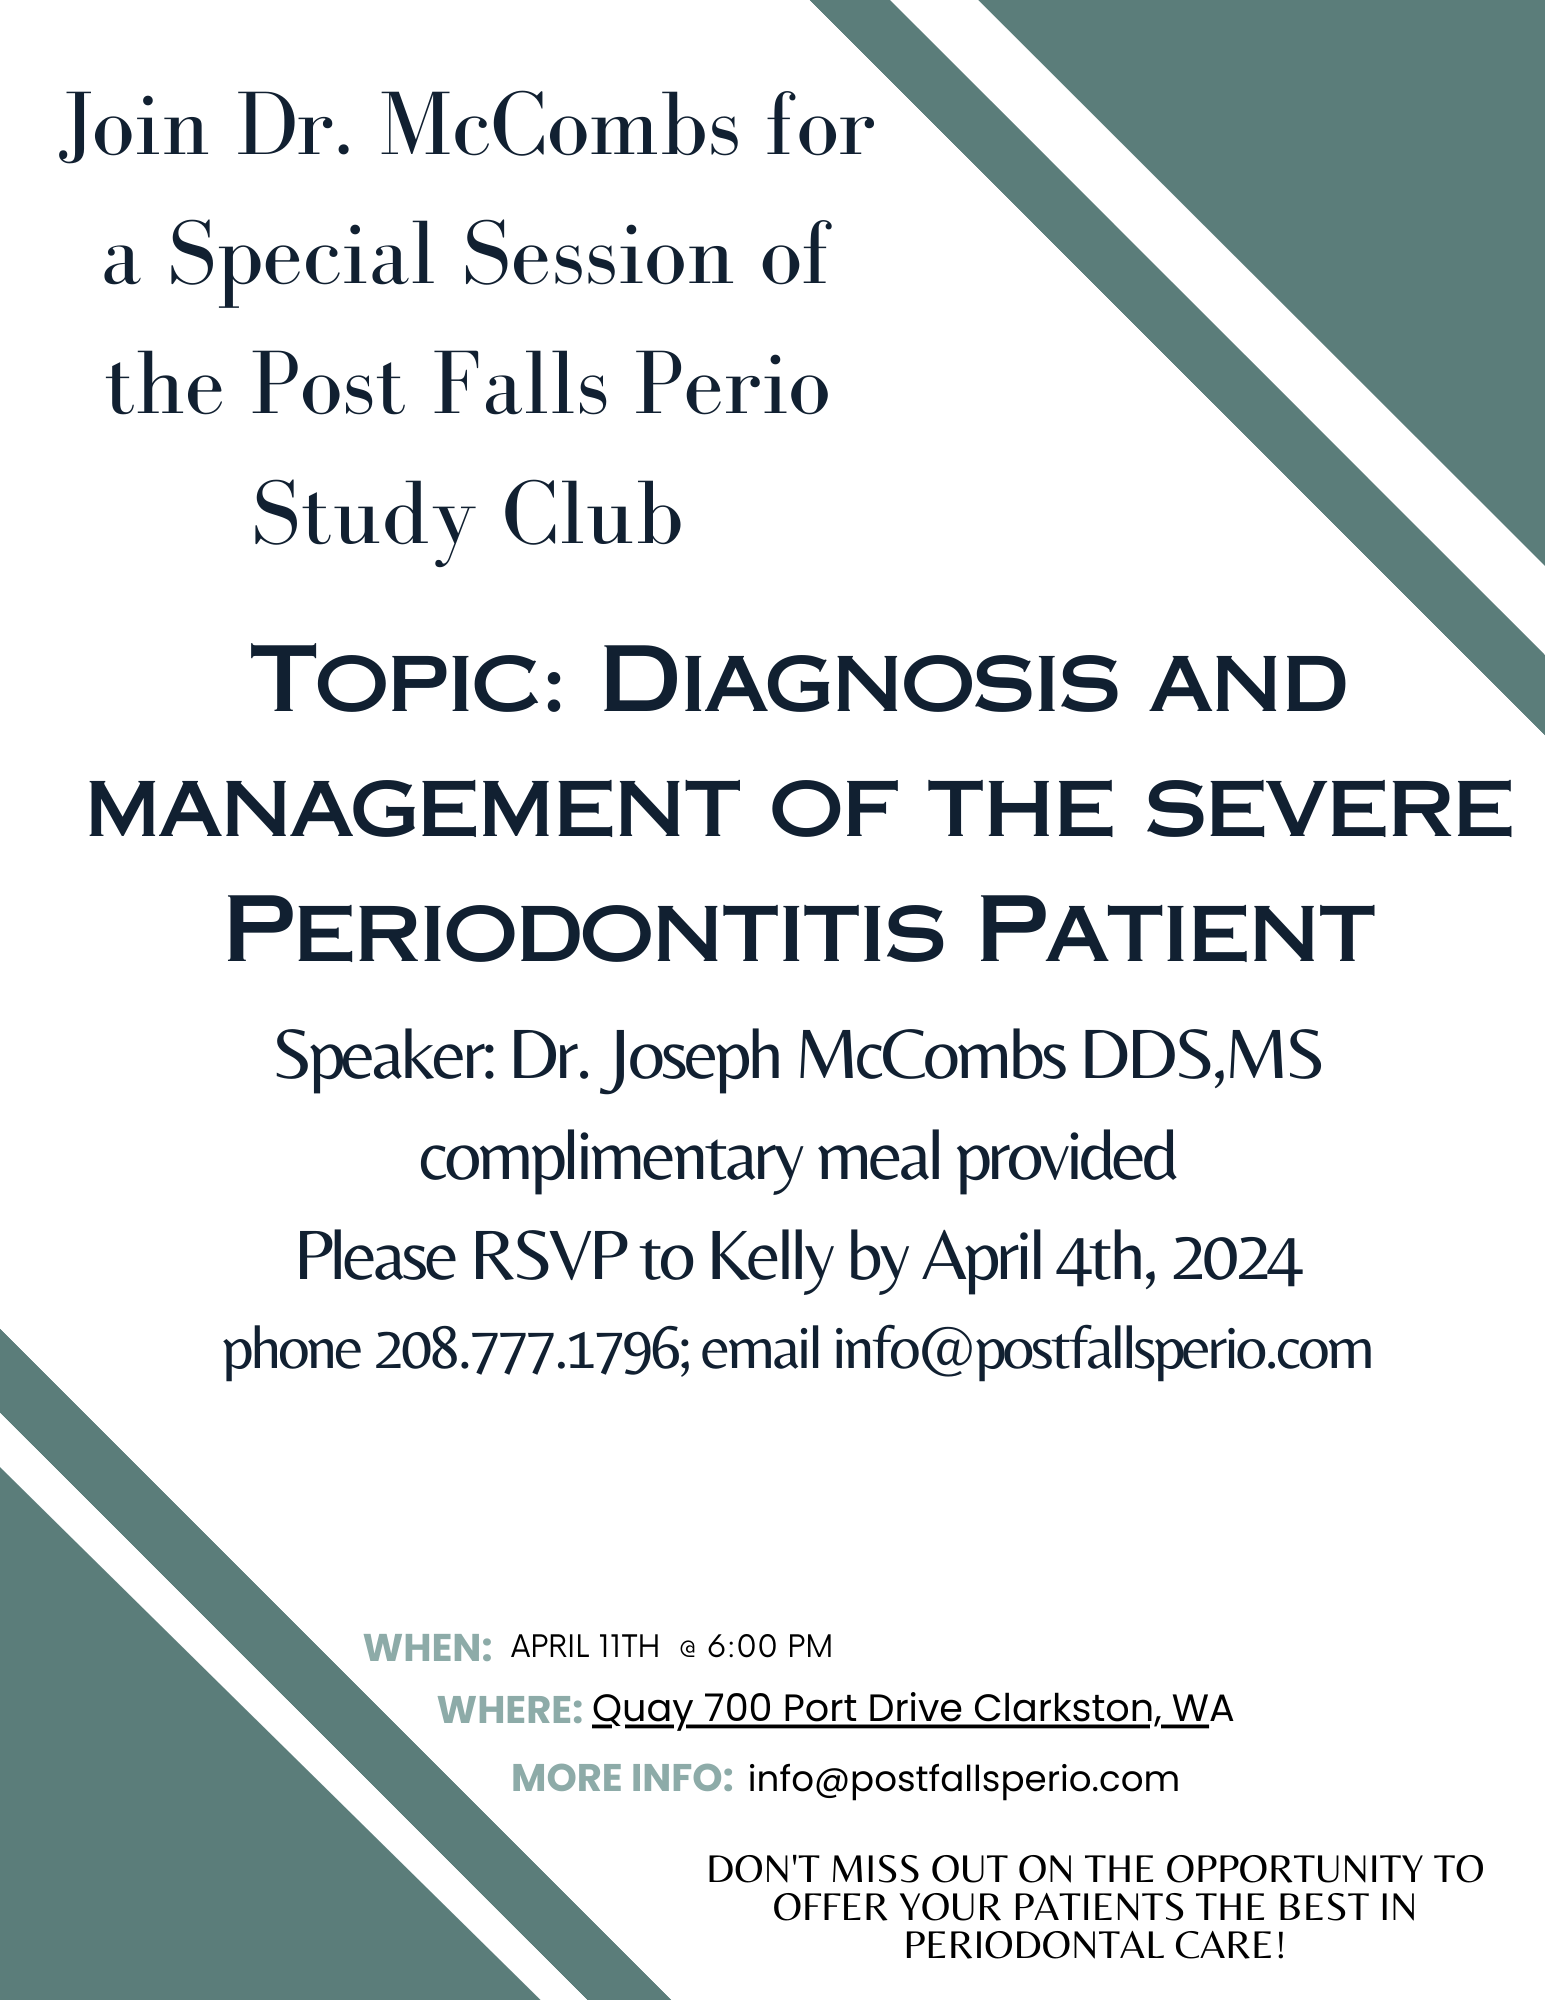 Flyer for event put on by Dr. Joe McCombs